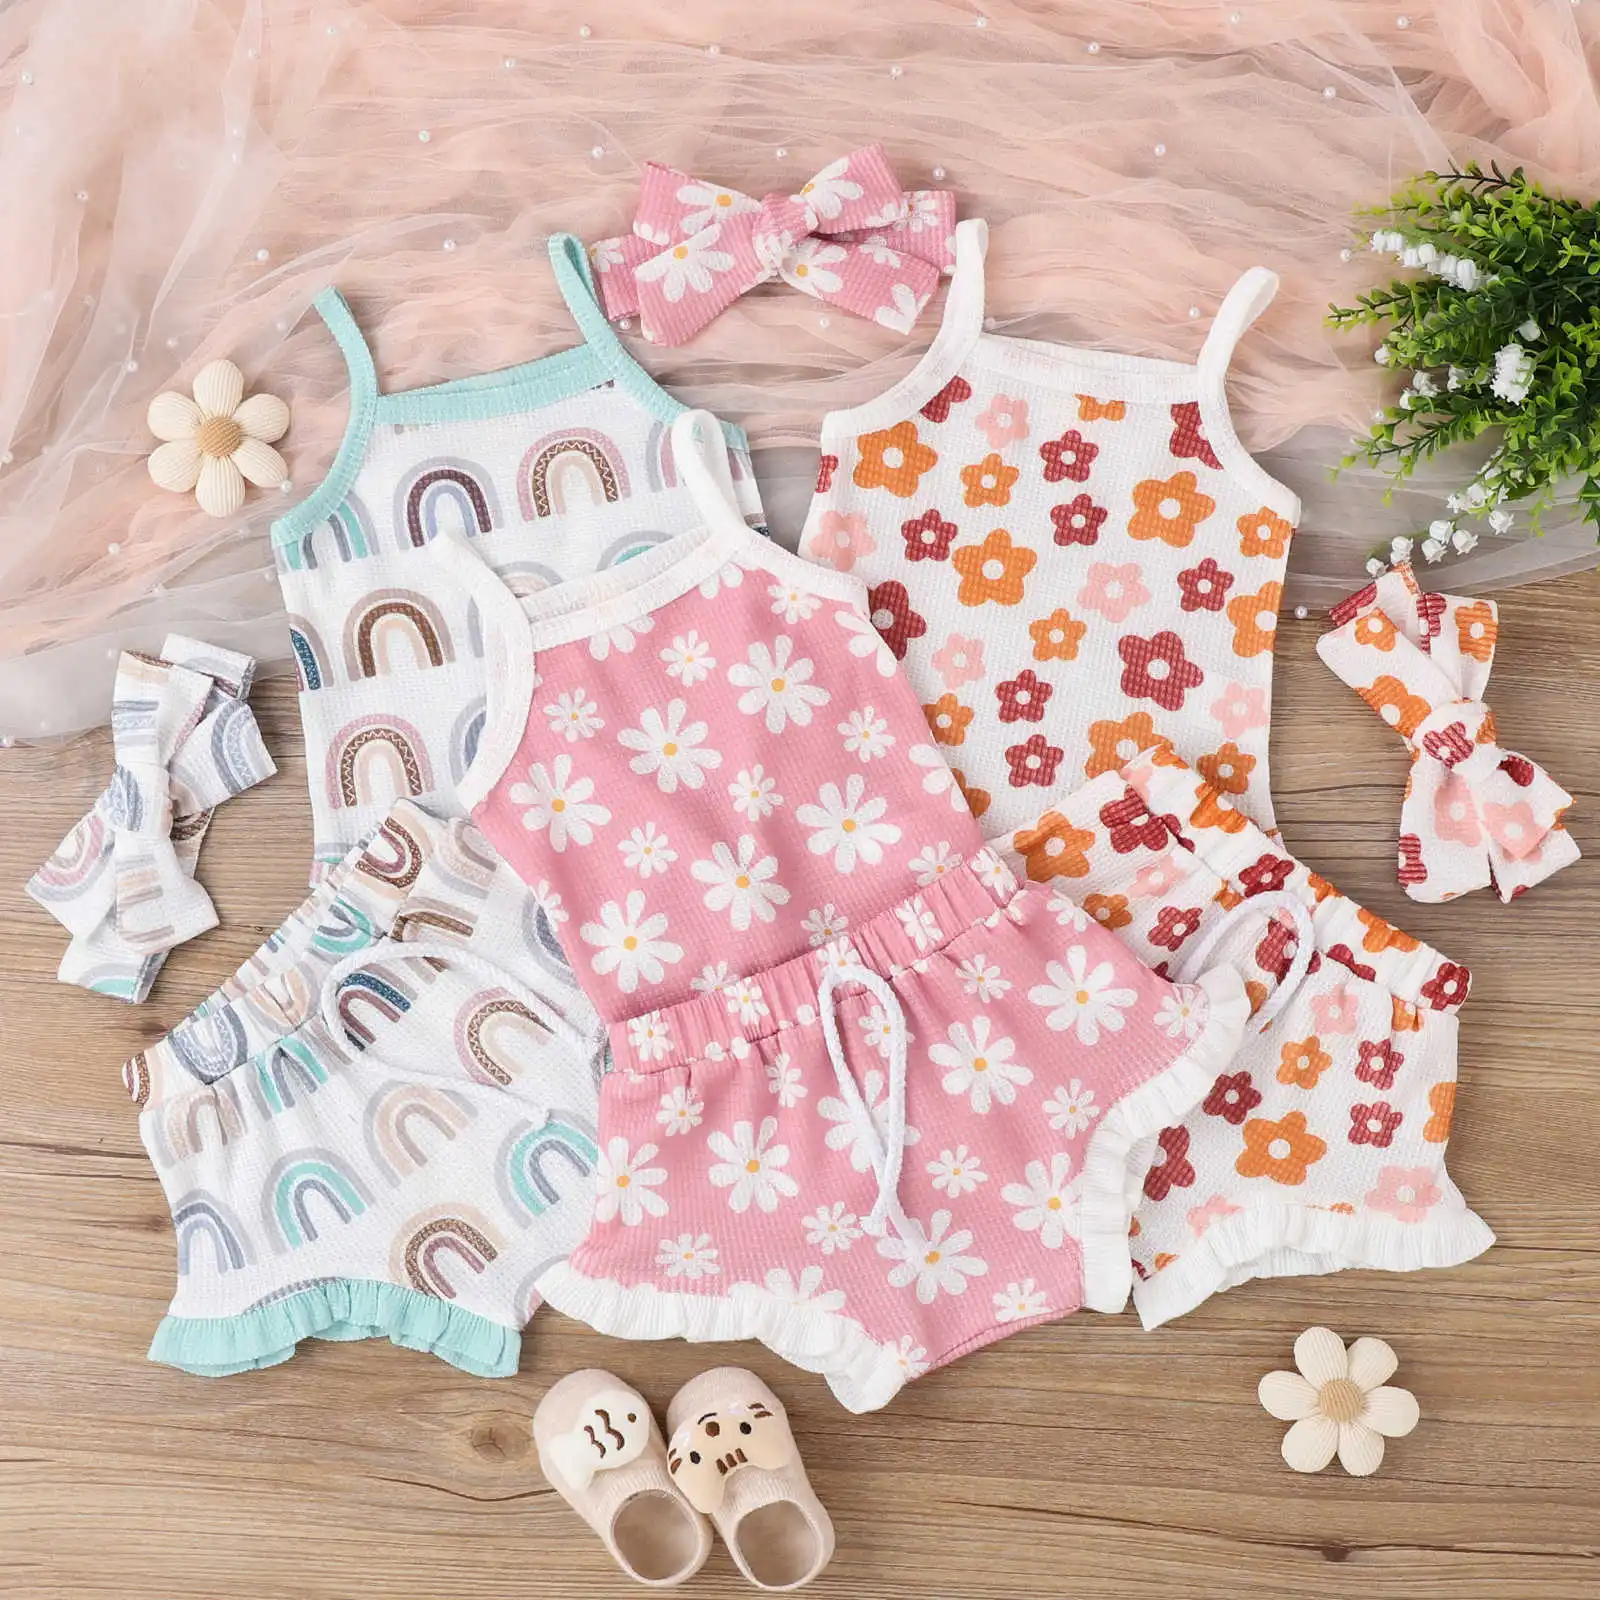 Newborn Baby Girls Summer Clothes Sets Lovely Sleeveles Rainbow Flower Strap + Lace Shorts + Headband 3Pcs Toddler Outfits 0-18M